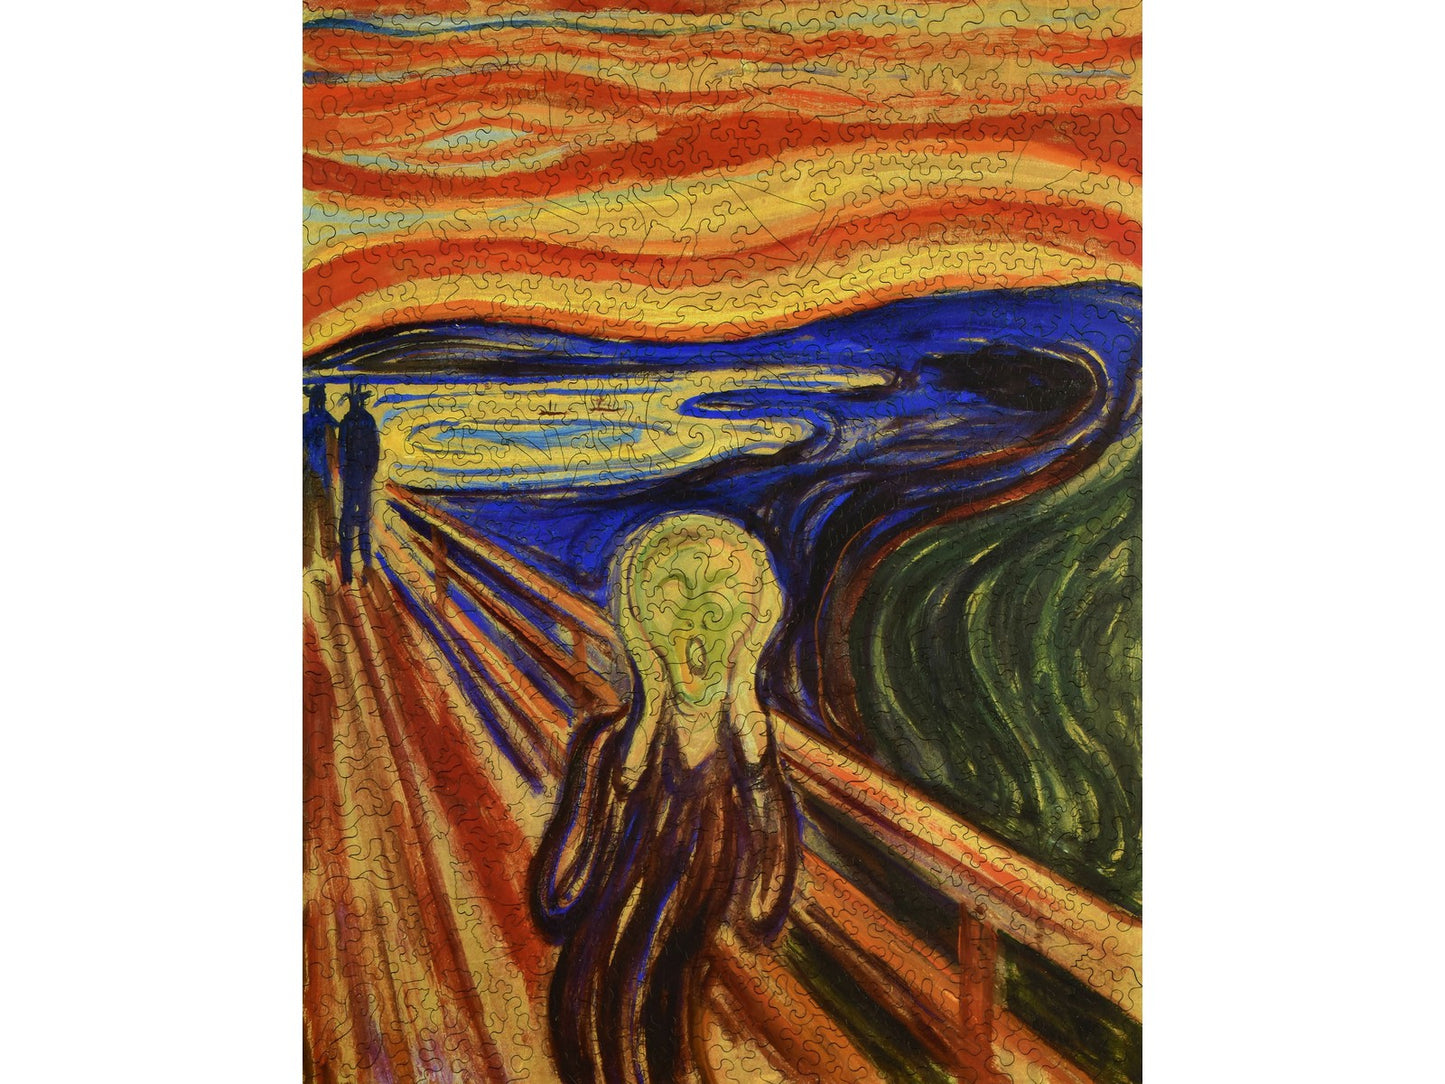 The front of the puzzle, The Scream, which shows a figure on a bridge holding it's head and screaming.